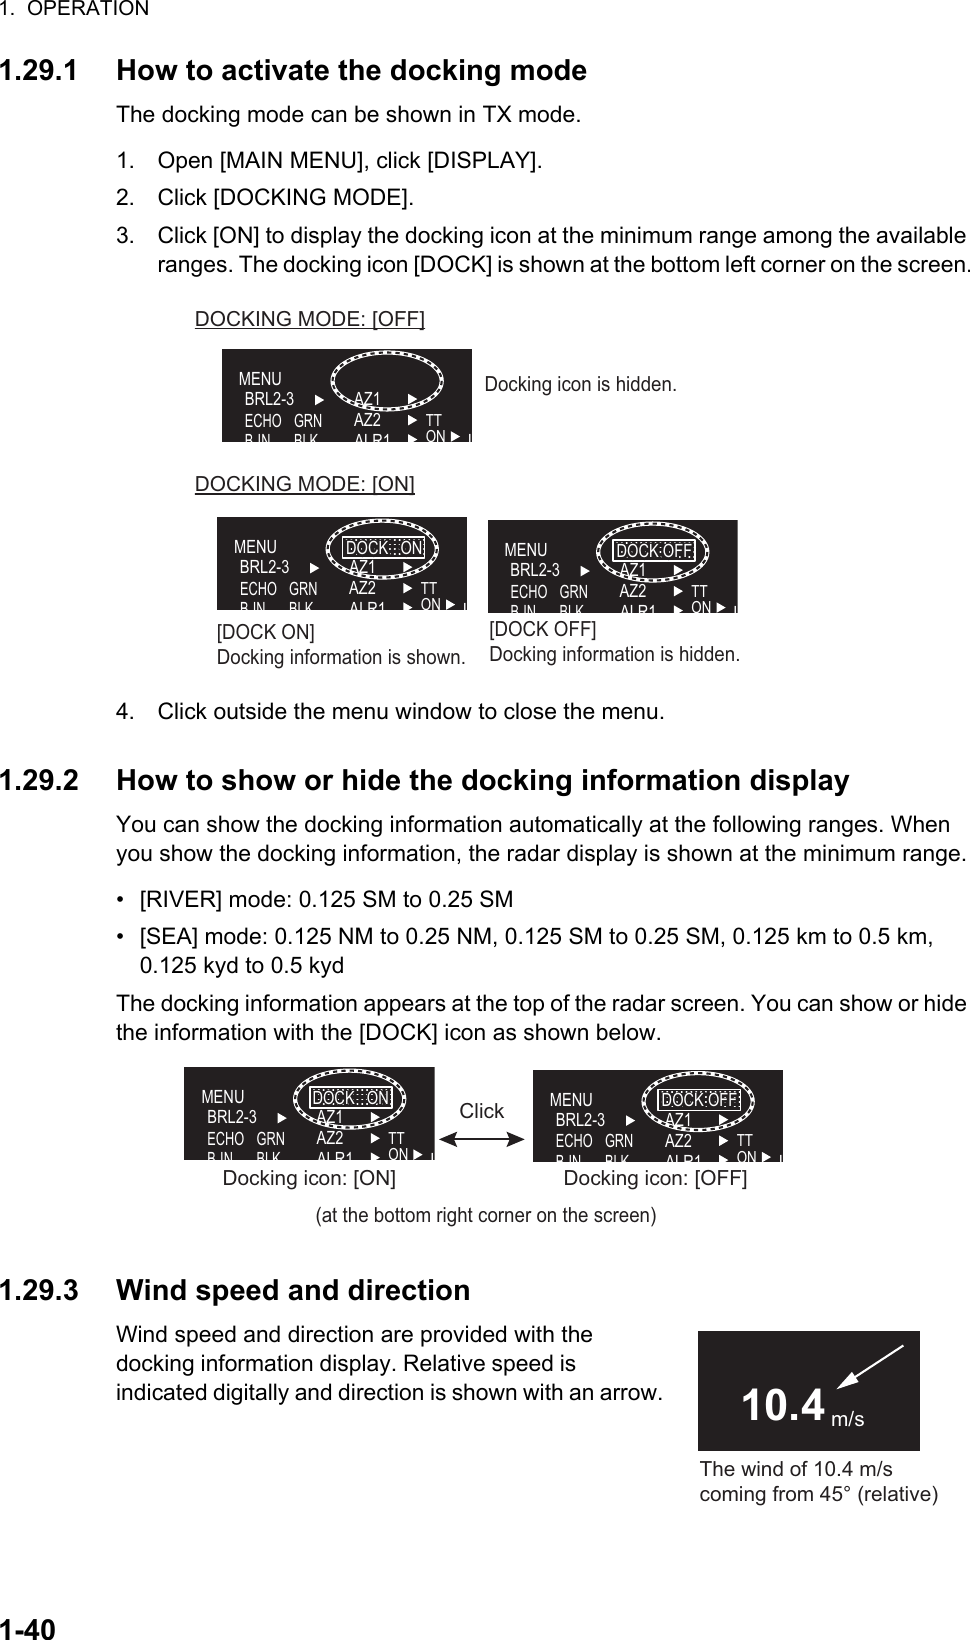 1.  OPERATION1-401.29.1 How to activate the docking modeThe docking mode can be shown in TX mode.1. Open [MAIN MENU], click [DISPLAY].2. Click [DOCKING MODE].3. Click [ON] to display the docking icon at the minimum range among the available ranges. The docking icon [DOCK] is shown at the bottom left corner on the screen.4. Click outside the menu window to close the menu.1.29.2 How to show or hide the docking information displayYou can show the docking information automatically at the following ranges. When you show the docking information, the radar display is shown at the minimum range.•  [RIVER] mode: 0.125 SM to 0.25 SM•  [SEA] mode: 0.125 NM to 0.25 NM, 0.125 SM to 0.25 SM, 0.125 km to 0.5 km, 0.125 kyd to 0.5 kydThe docking information appears at the top of the radar screen. You can show or hide the information with the [DOCK] icon as shown below.1.29.3 Wind speed and directionWind speed and direction are provided with the      docking information display. Relative speed is               indicated digitally and direction is shown with an arrow.MENUBRL2-3ECHOBINAZ1AZ2ALR1TTON LGRNBLKDOCK   ONDOCK   ONMENUBRL2-3ECHOBINAZ1AZ2ALR1TTON LGRNBLKDOCKING MODE: [OFF]DOCKING MODE: [ON]MENUBRL2-3ECHOBINAZ1AZ2ALR1TTON LGRNBLKDOCK OFFDOCK OFF[DOCK ON]Docking information is shown.[DOCK OFF]Docking information is hidden.Docking icon is hidden.MENUBRL2-3ECHOBINAZ1AZ2ALR1TTONLGRNBLKDOCK   ONDOCK   ON(at the bottom right corner on the screen)Docking icon: [ON]Docking icon: [ON]MENUBRL2-3ECHOBINAZ1AZ2ALR1TTONLGRNBLKDOCK OFFDOCK OFFDocking icon: [OFF]Docking icon: [OFF]ClickThe wind of 10.4 m/s coming from 45° (relative)10.4 m/s